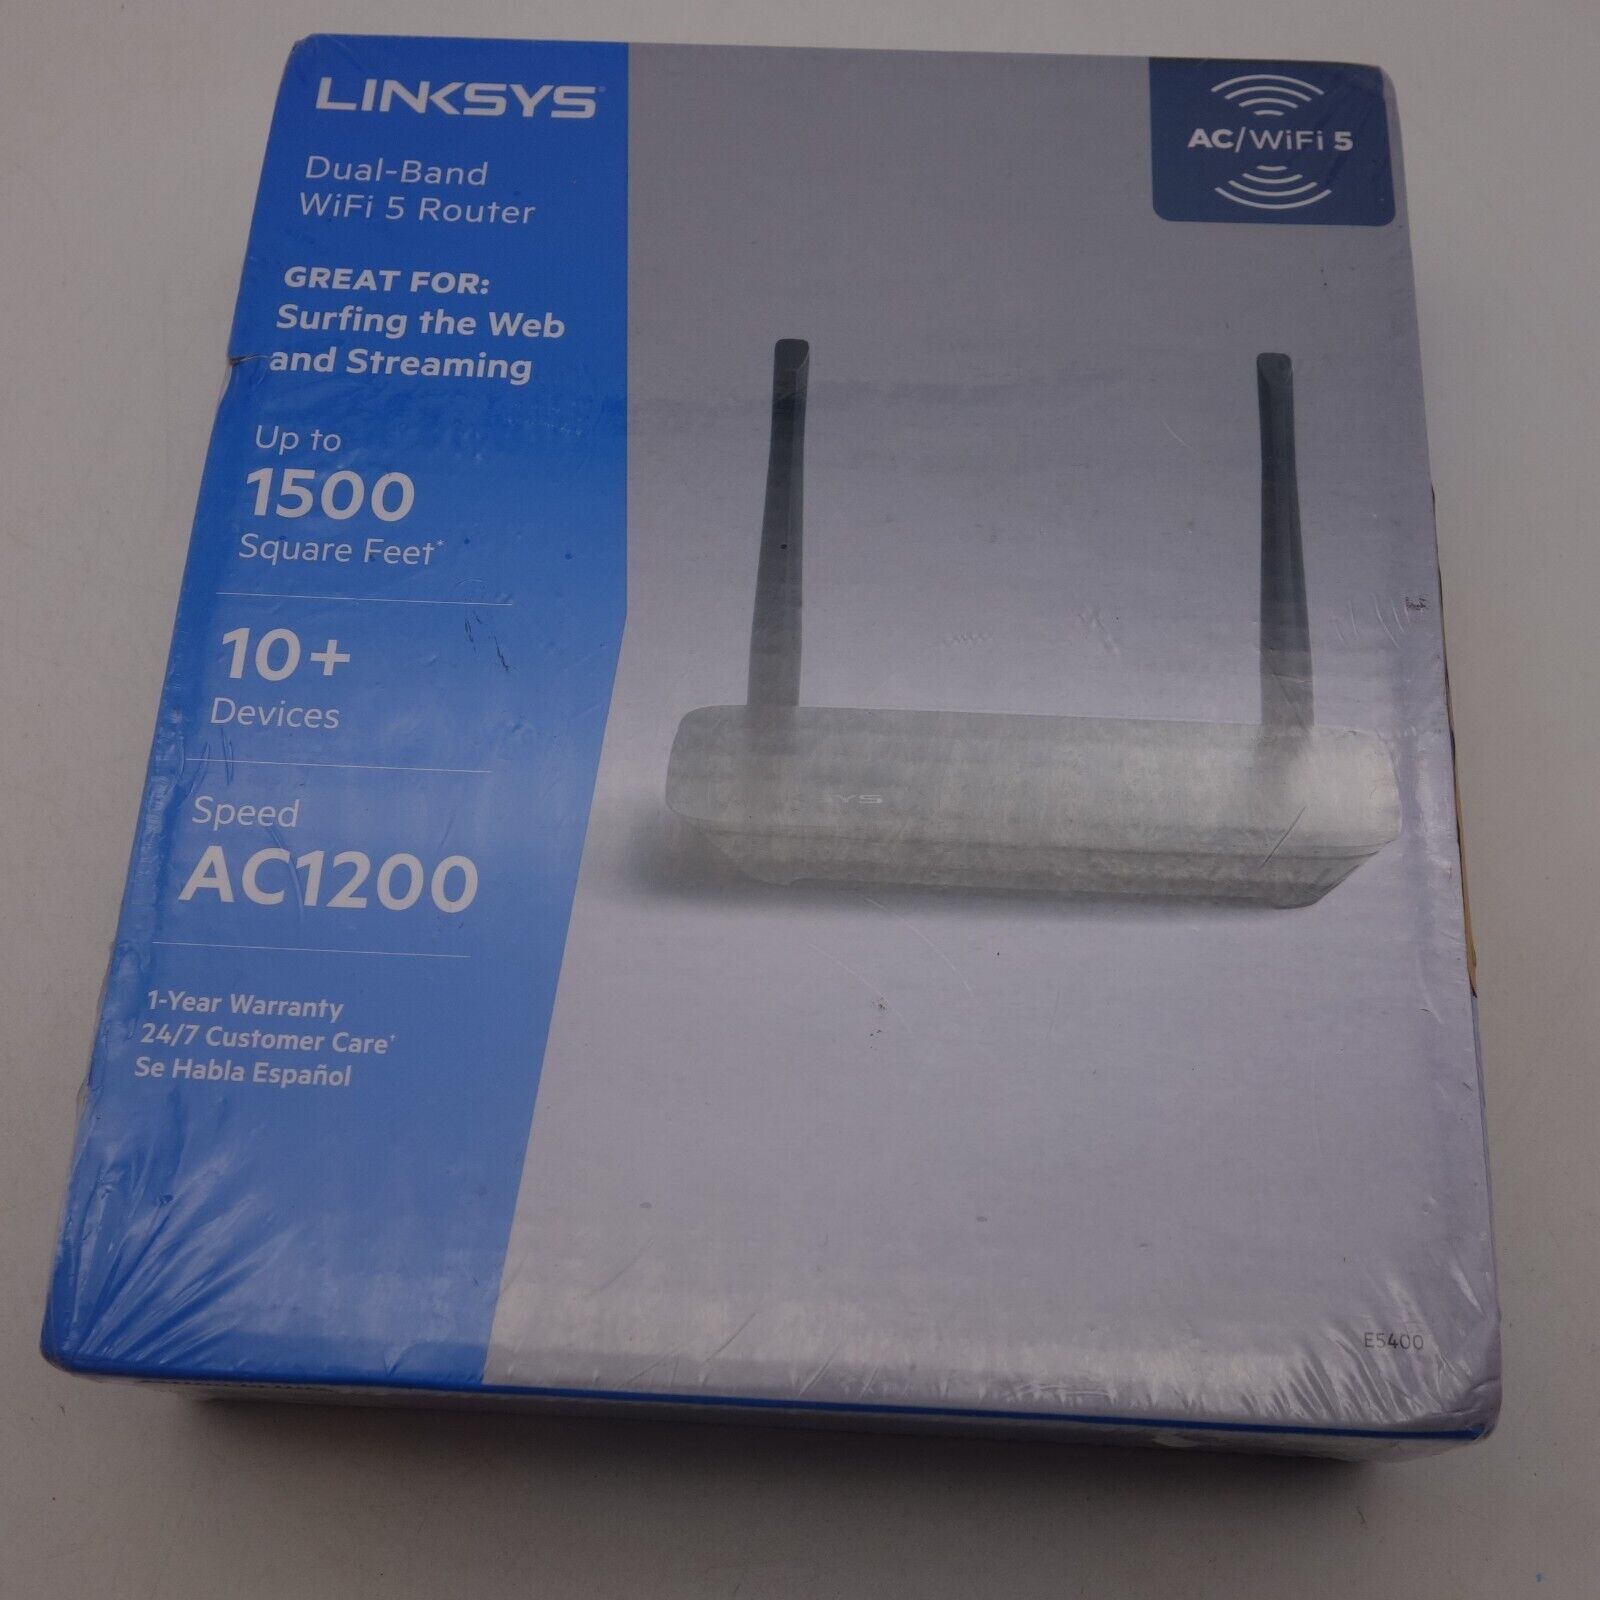 NEW Linksys WiFi 5 Router Dual-Band AC1200 (E5400) Sealed Box